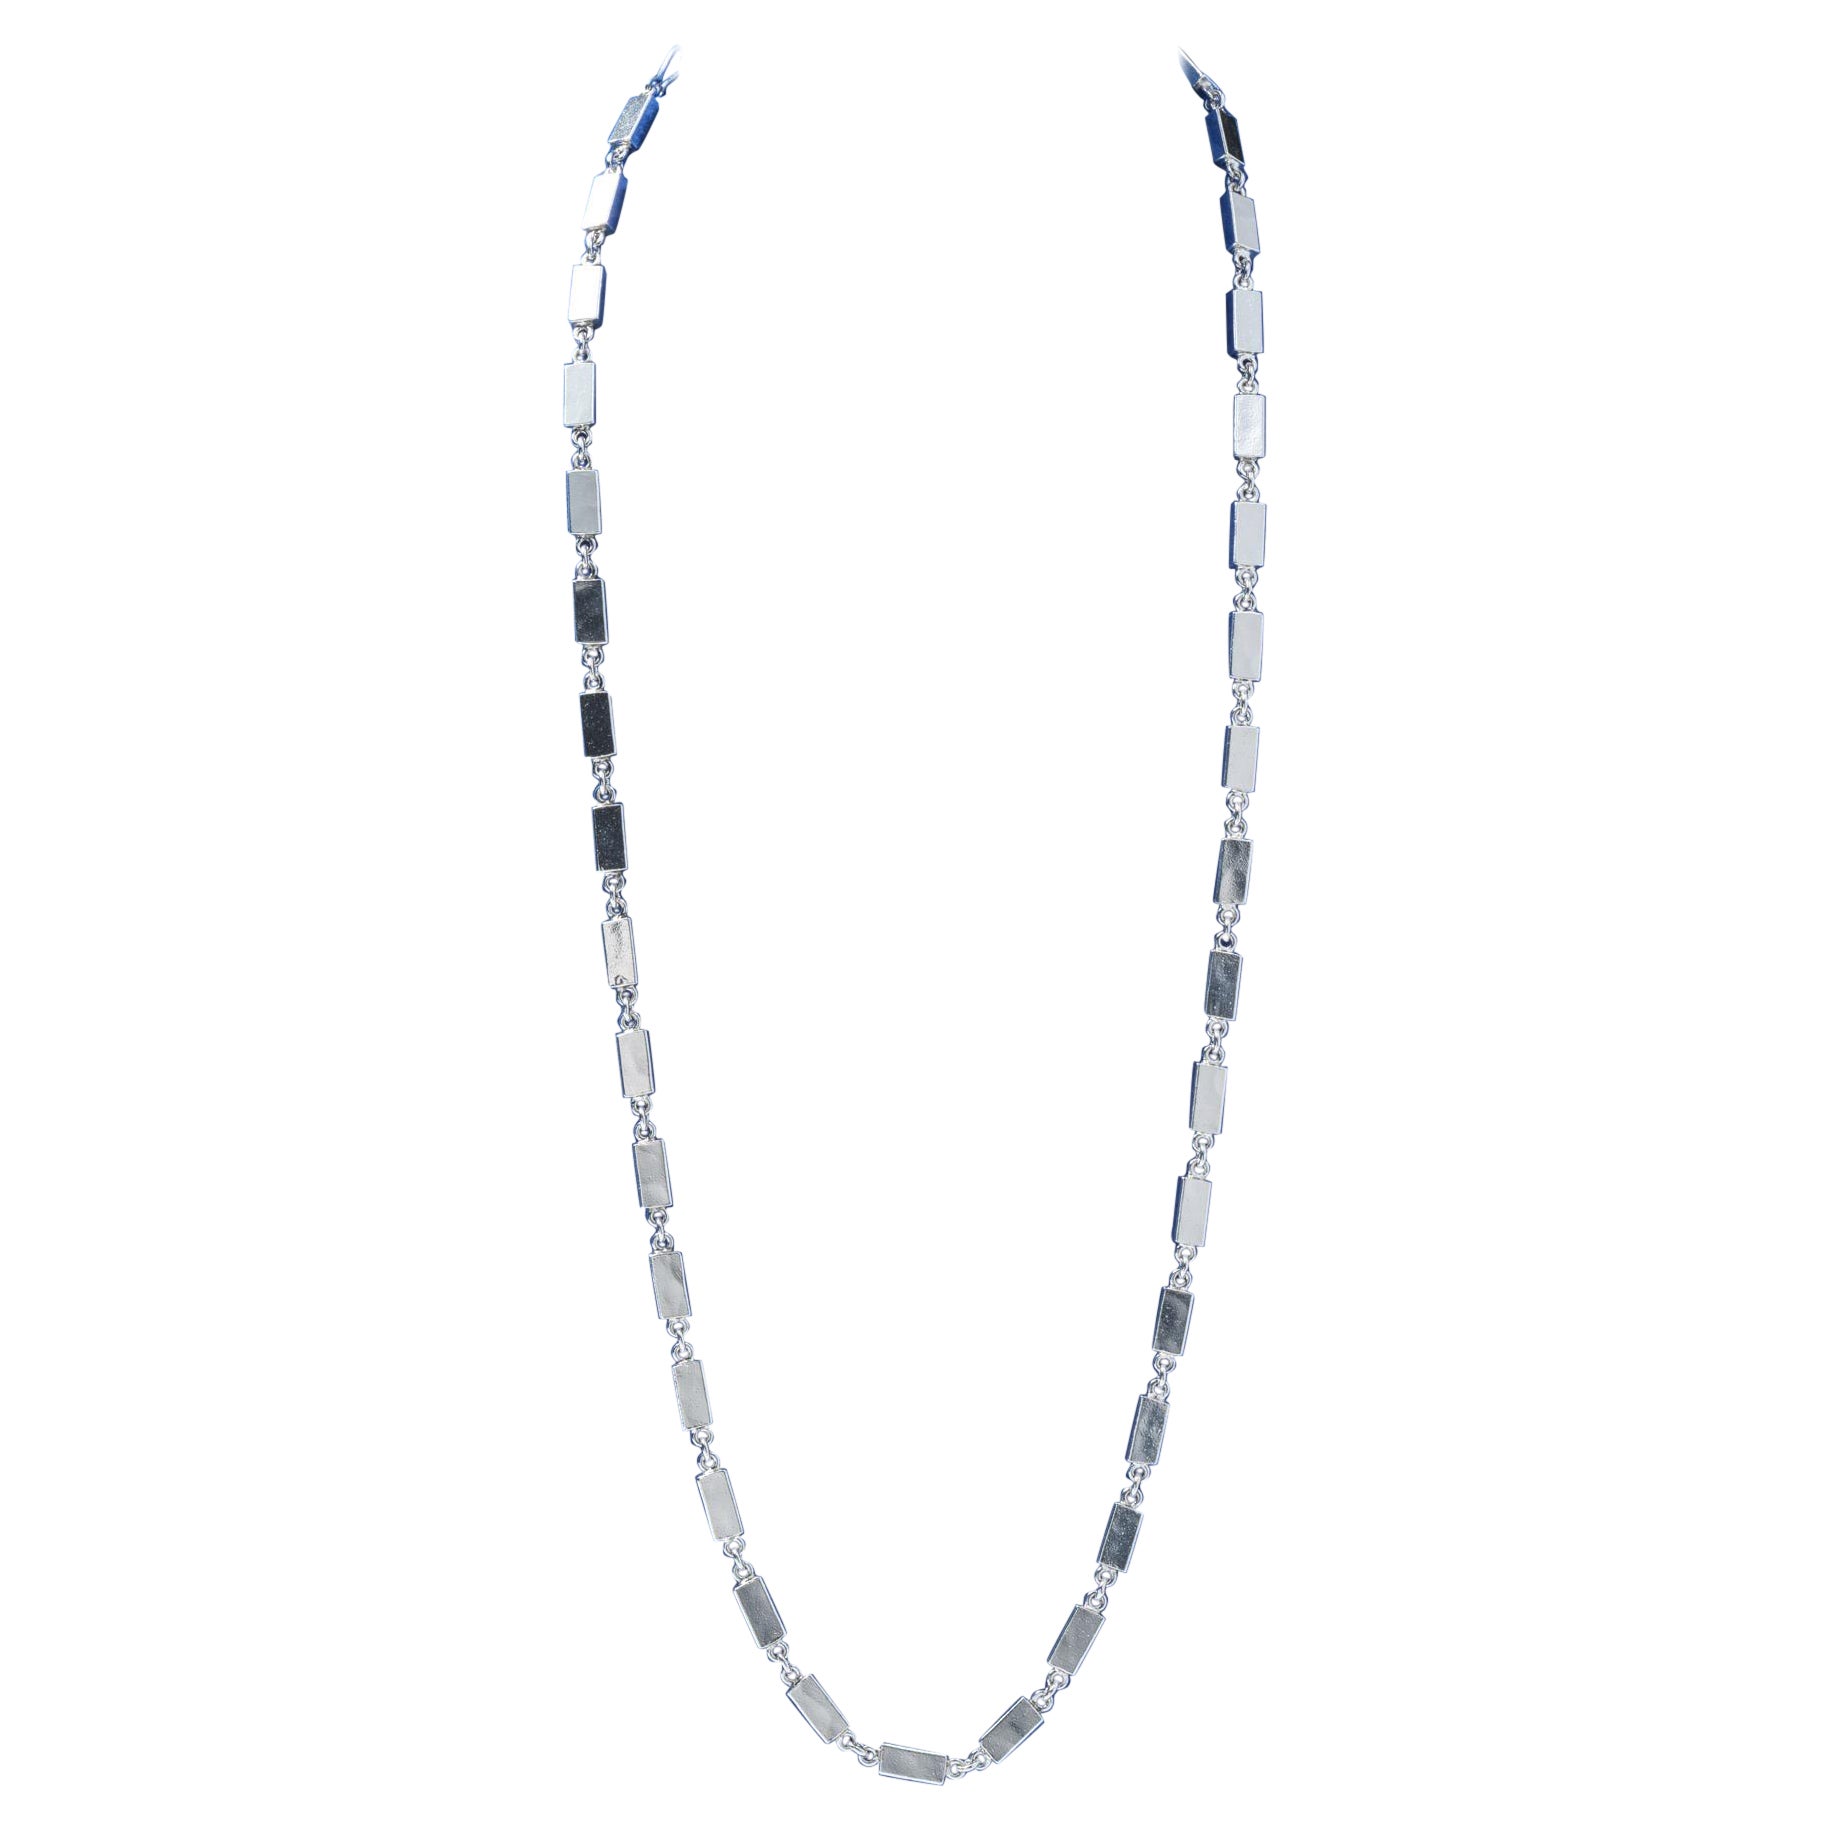 This geometrical necklace has a heavy and modern feeling to it despite that it was made about 40 years ago. Rey Urban was one of Swedens most famous silversmiths in this era. He held international exhibitions in many countries and was popular among